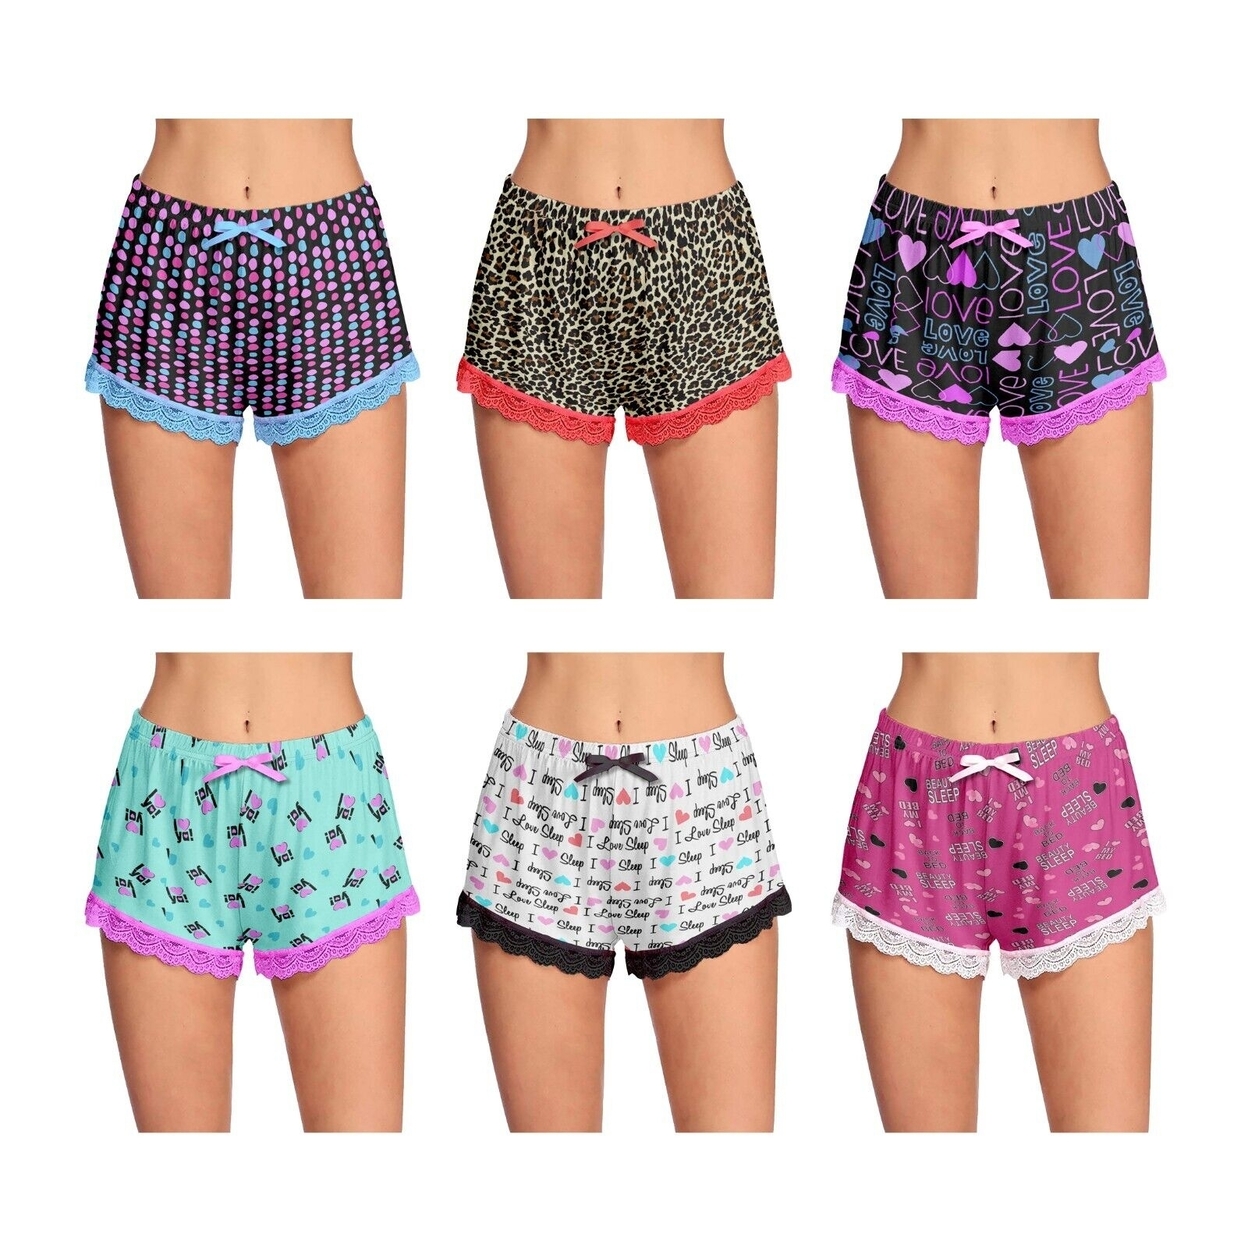 4-Pack: Women's Ultra-Soft Cozy Fun Printed Lace Trim Pajama Lounge Shorts - Small, Shapes